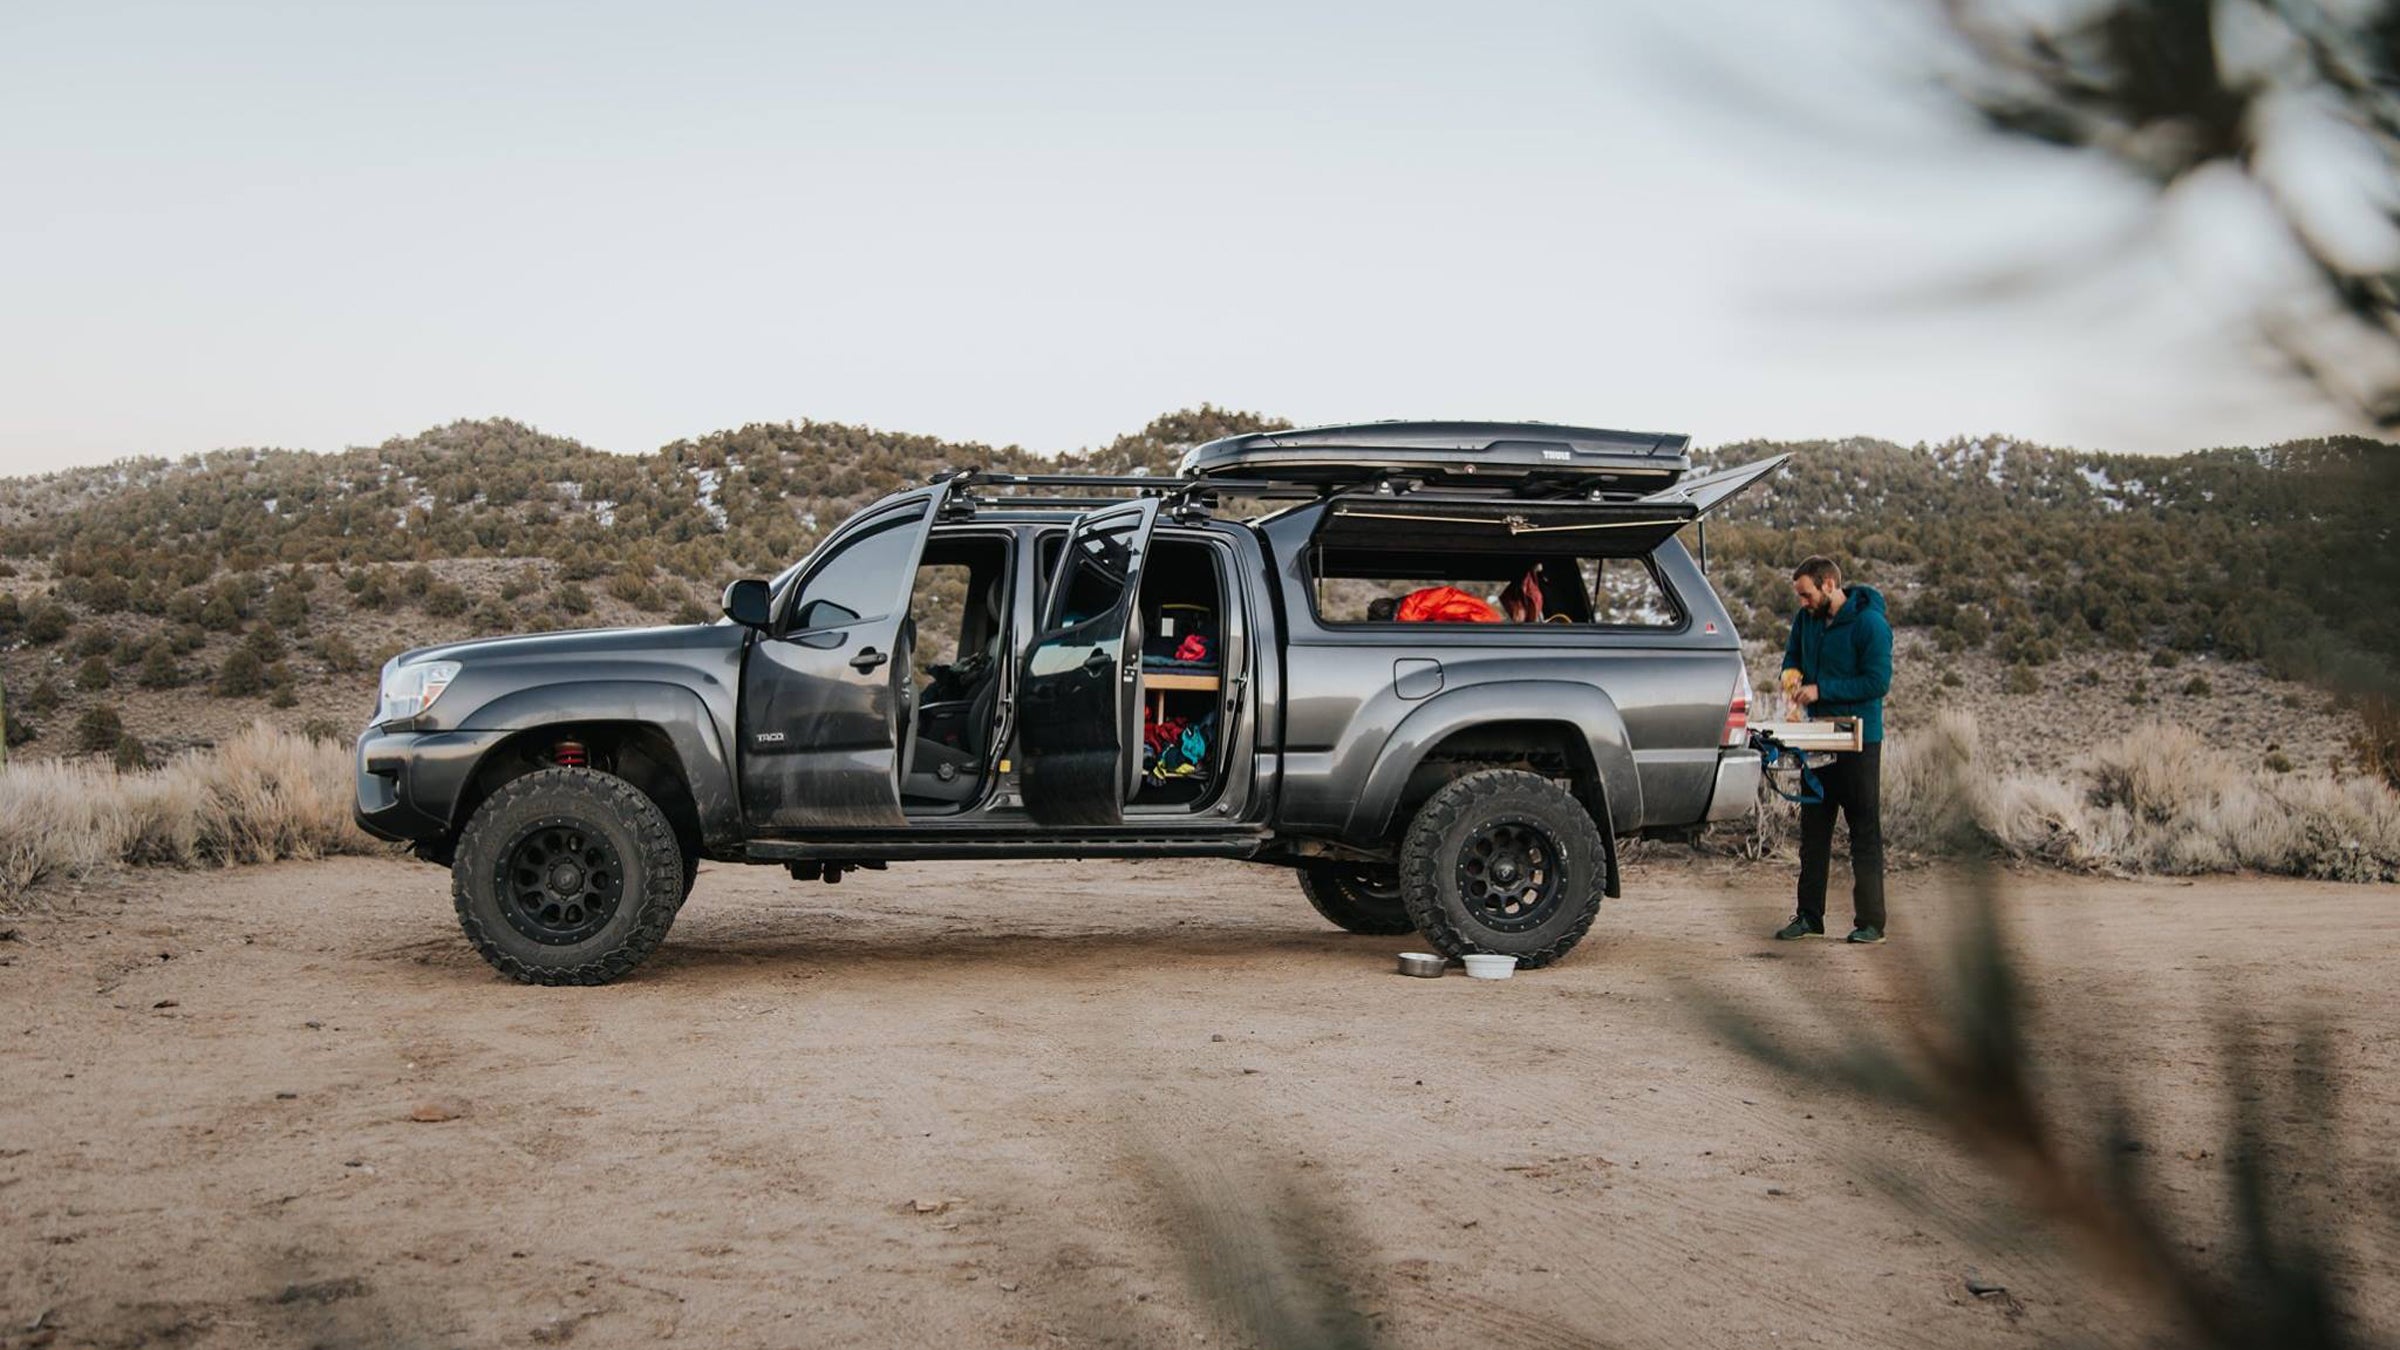 Toyota Tacoma Camping Gear & Accessories